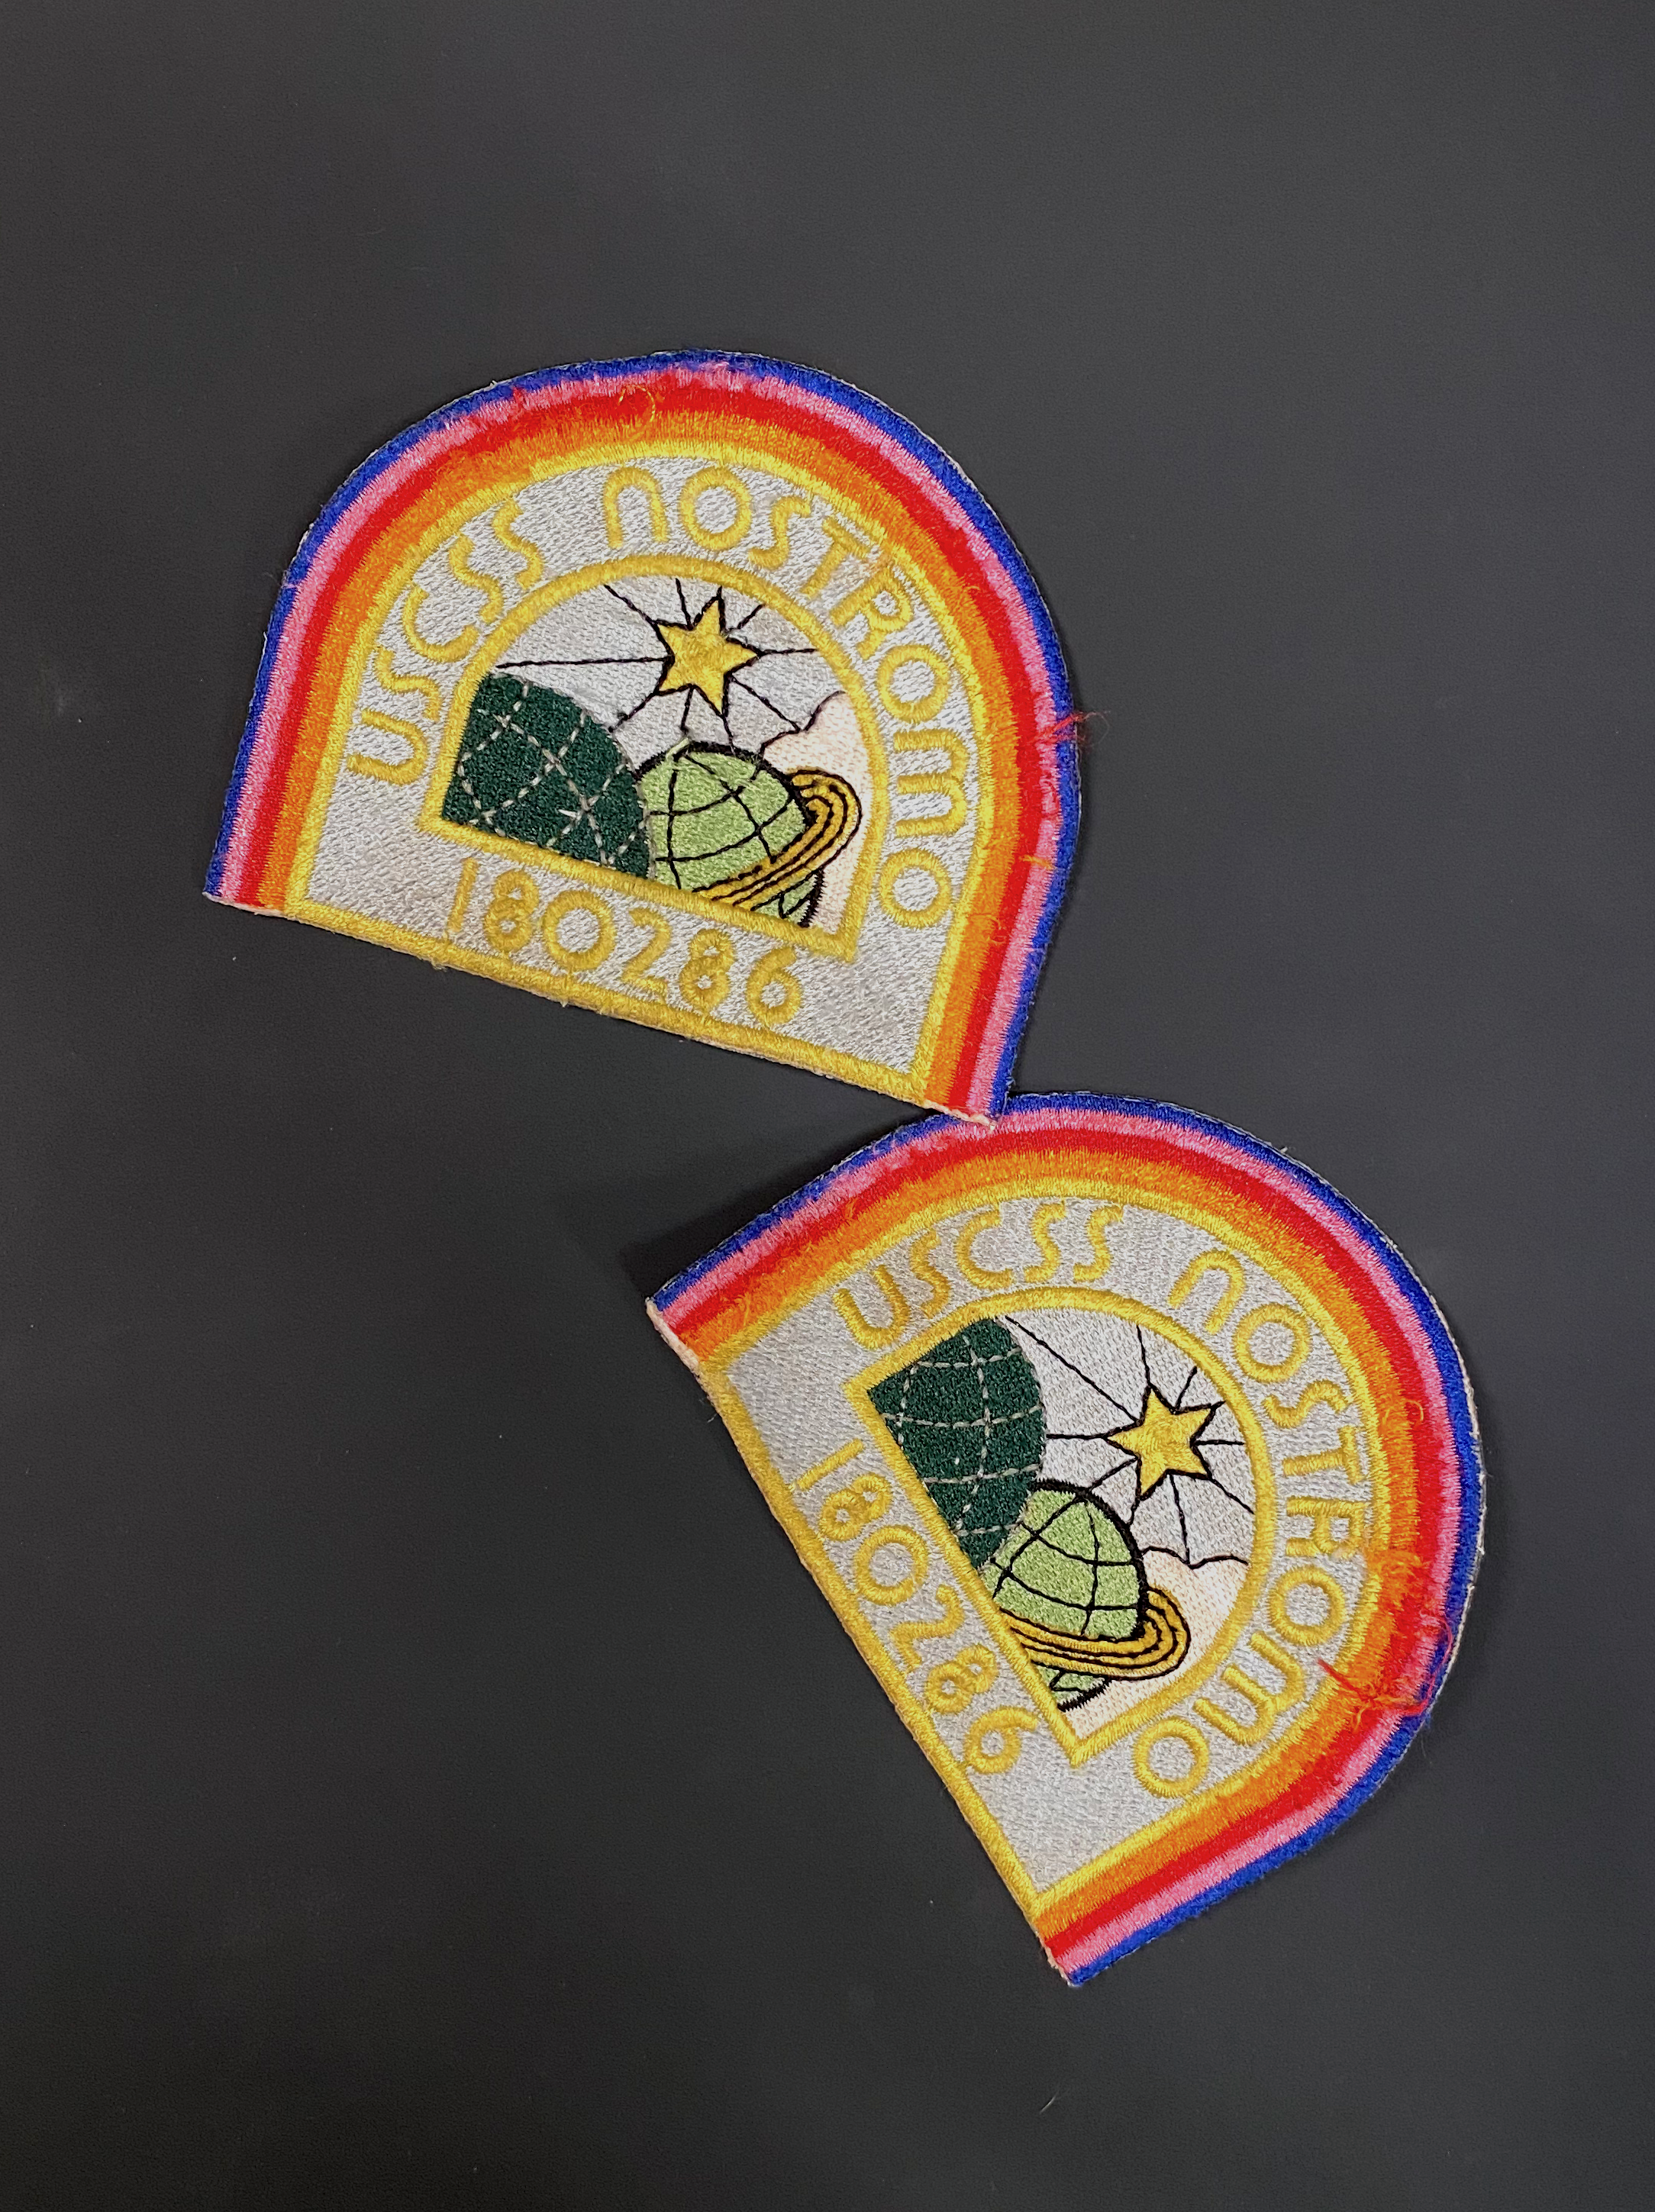 45-nostromo-jacket-in-progress-crew-patches.png